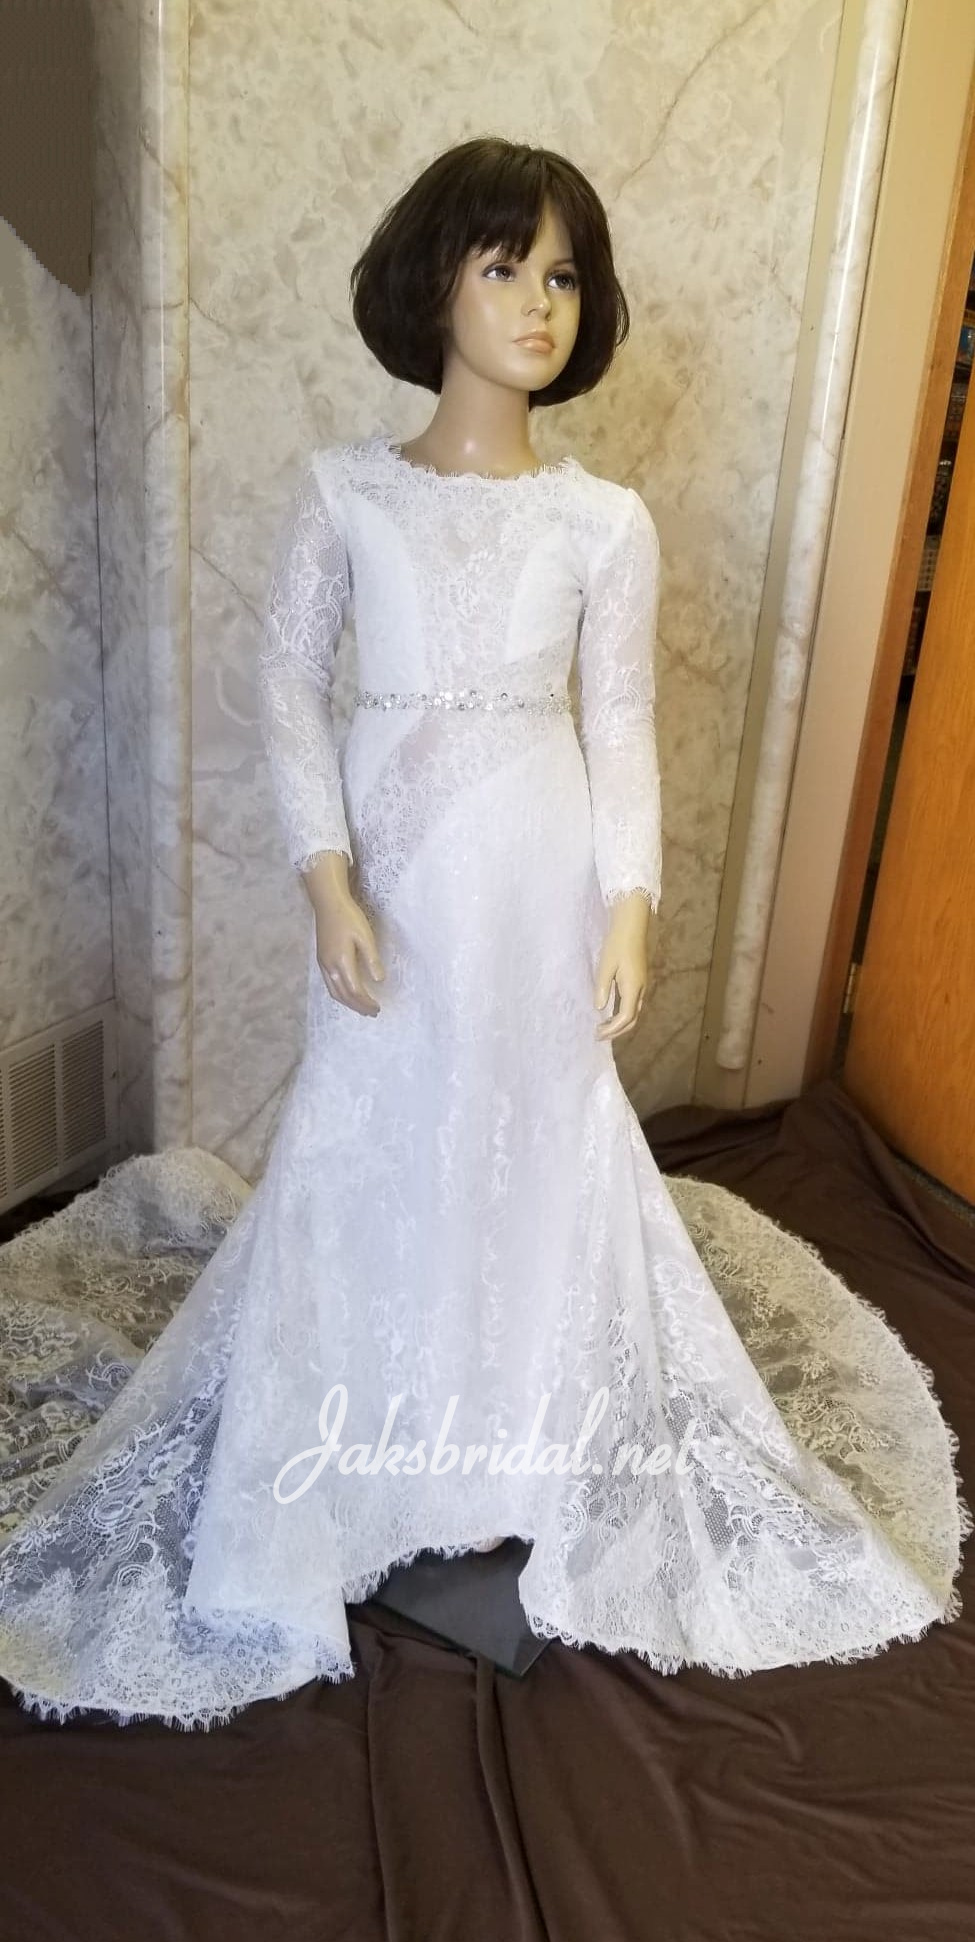 Long sleeve flower girl dress, sprinkled with sequins. Lace illusion sleeves, neck, back and train